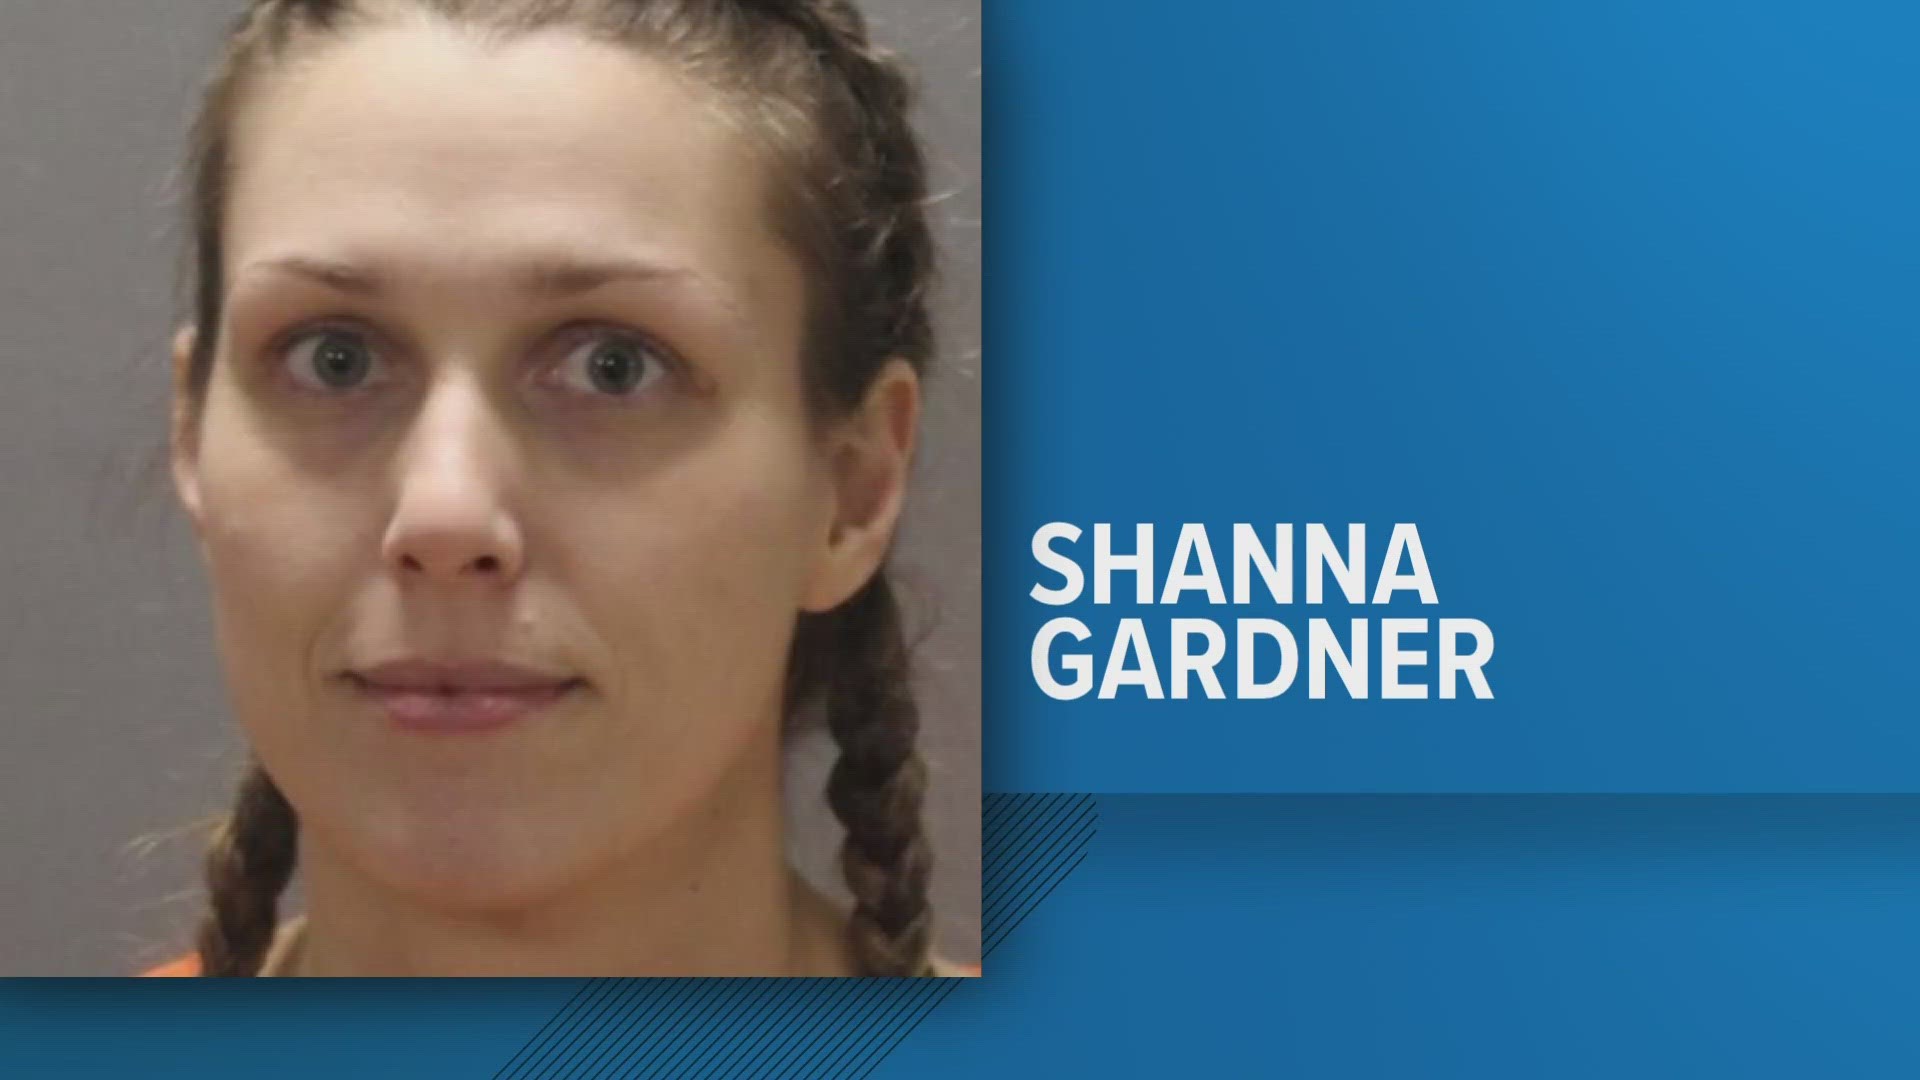 Days after being extradited back to Florida, the first booking photo of Shanna Gardner was released Monday. She is accused of first-degree murder.